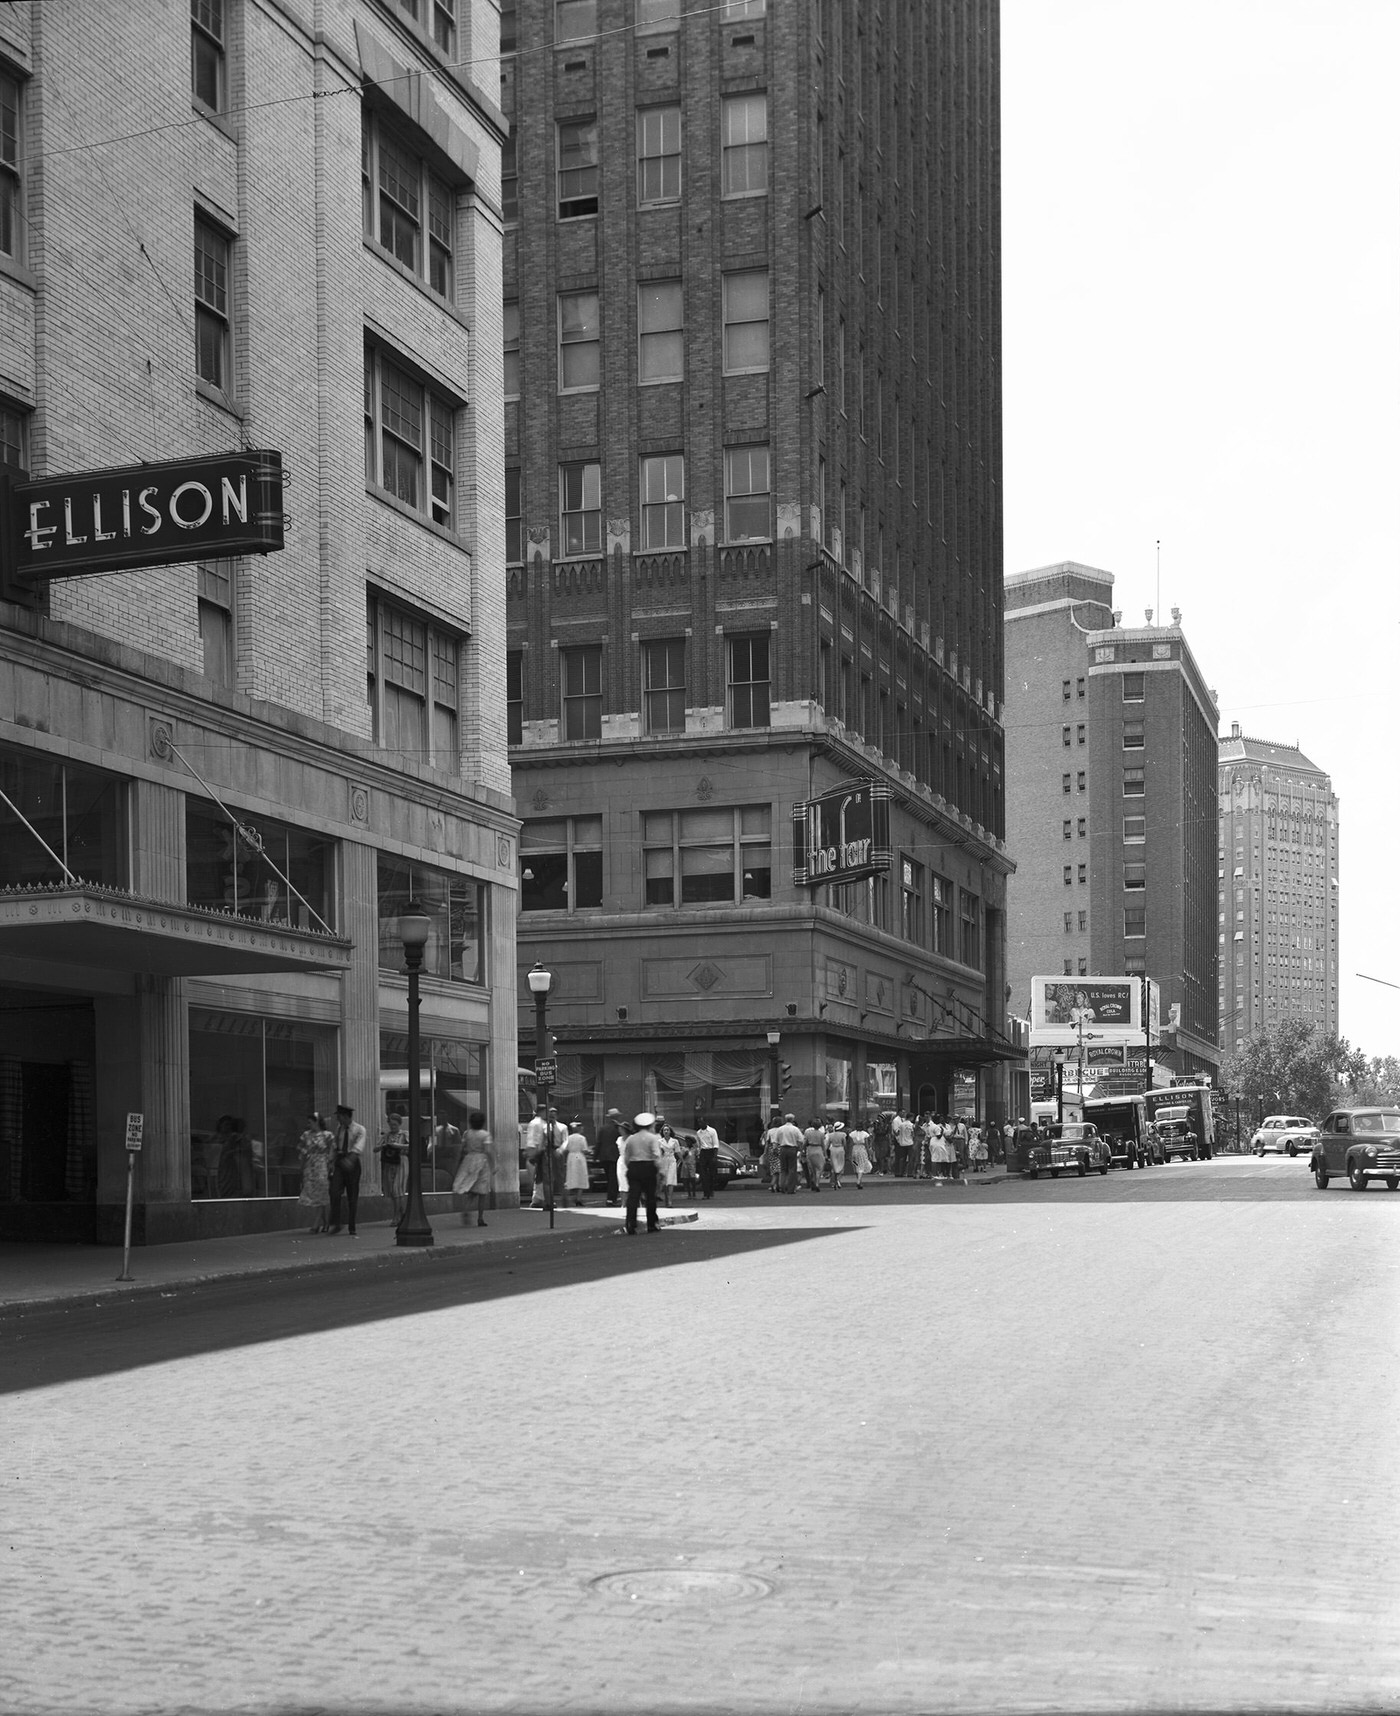 The Fair Department Store with Ellison's Furniture Store in the foreground; 7th Street, downtown Fort Worth, 1947